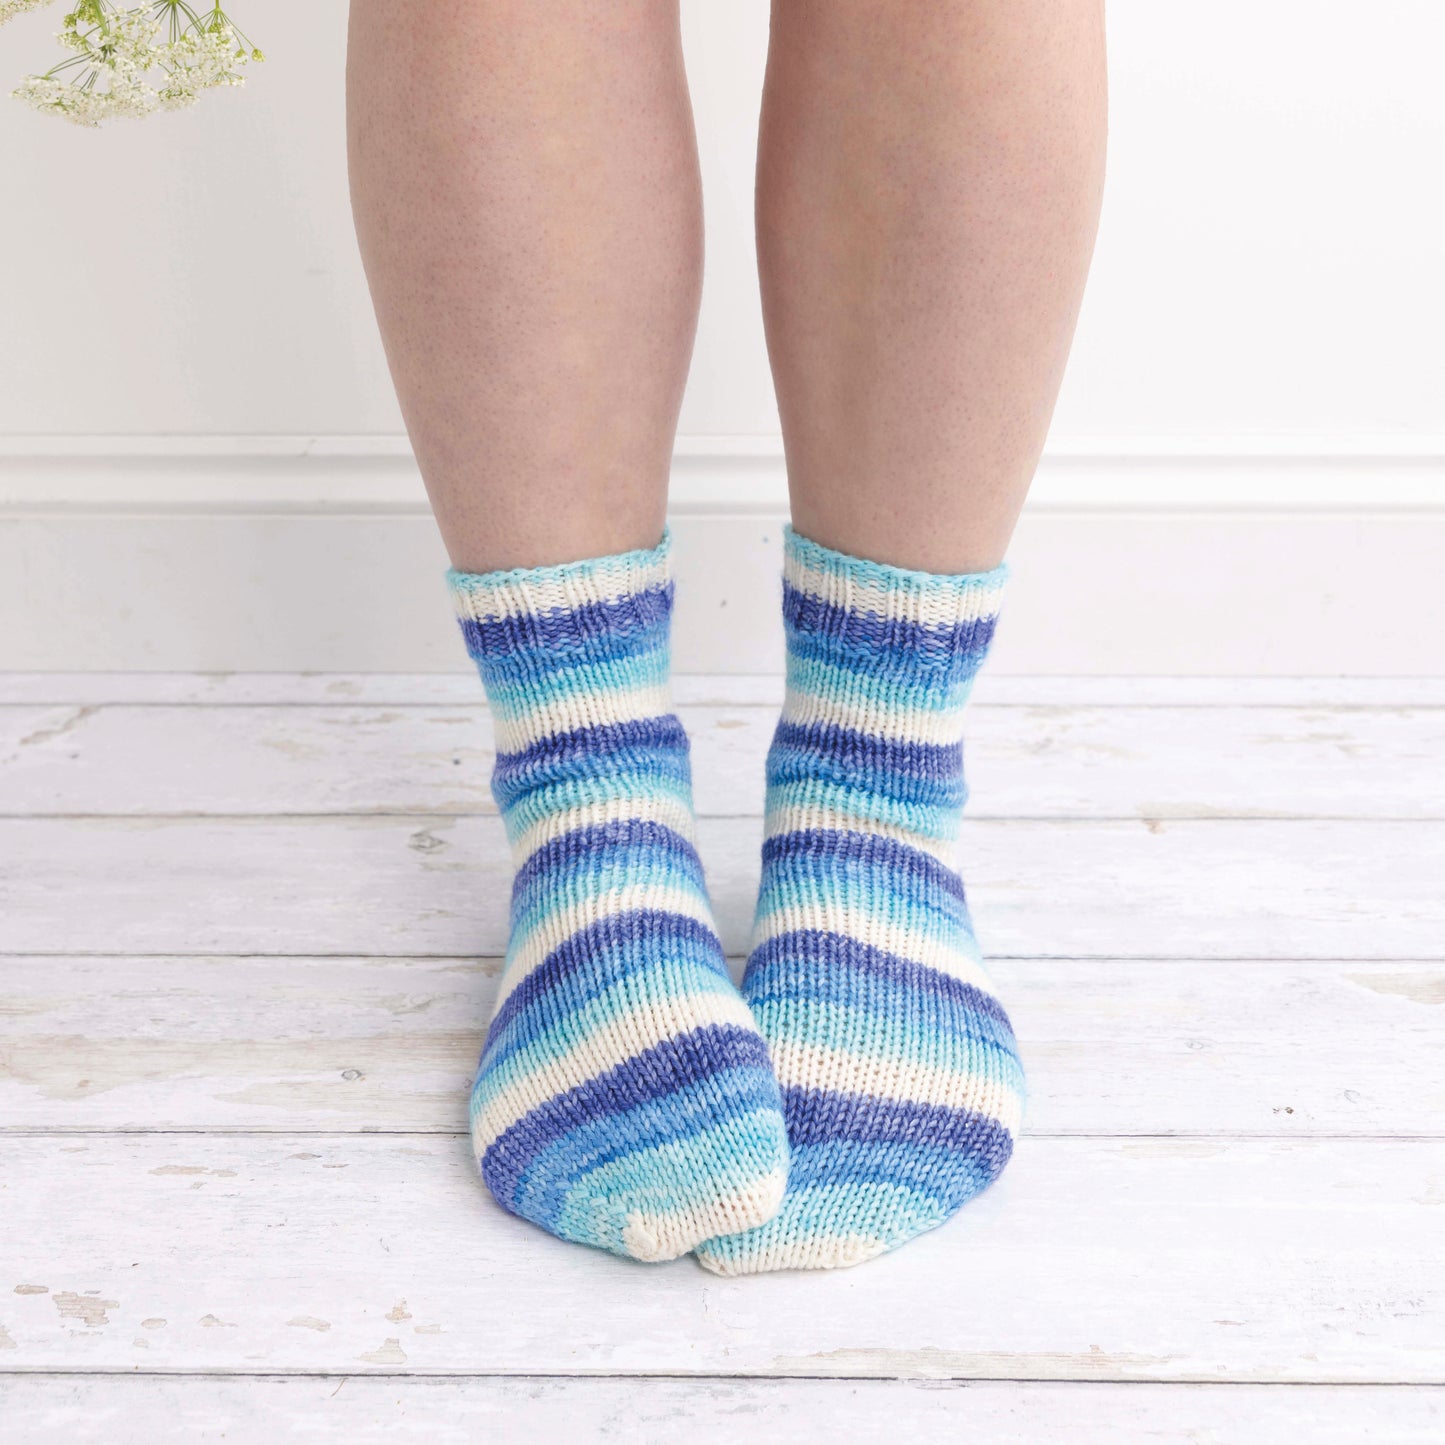 PRE-ORDER Knit A Box of Socks BOOK! 24 sock knitting patterns for your dream box of socks